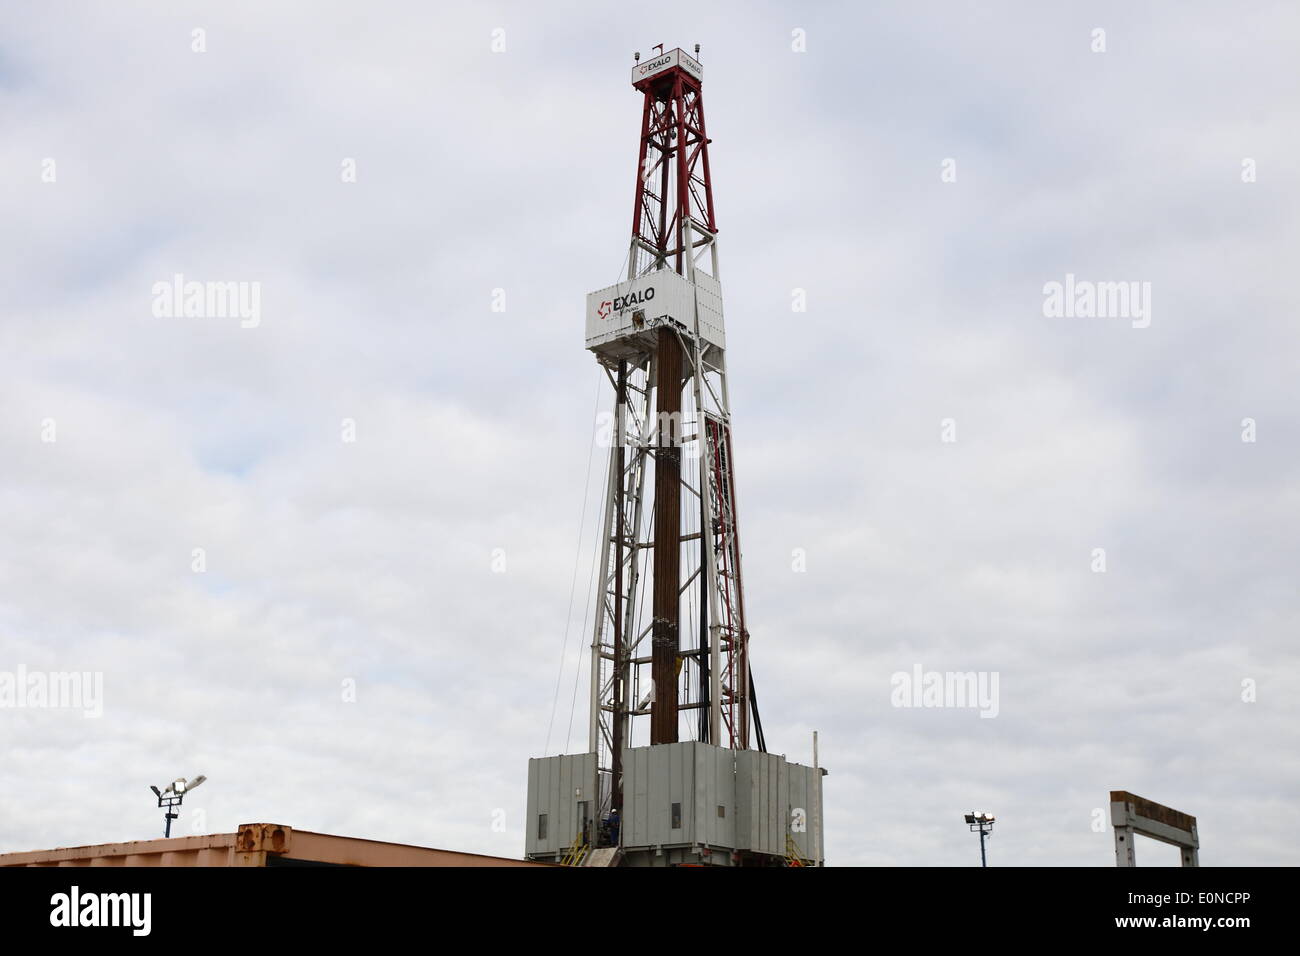 Milowo, Poland 17th, May 2014 The PGNiG SA Company started new shale gas research in Milowo in northern Poland  (the Kartuzy concession). The drilling process will take 2 months and is planned to 3800-meters depth. Credit:  Michal Fludra/Alamy Live News Stock Photo